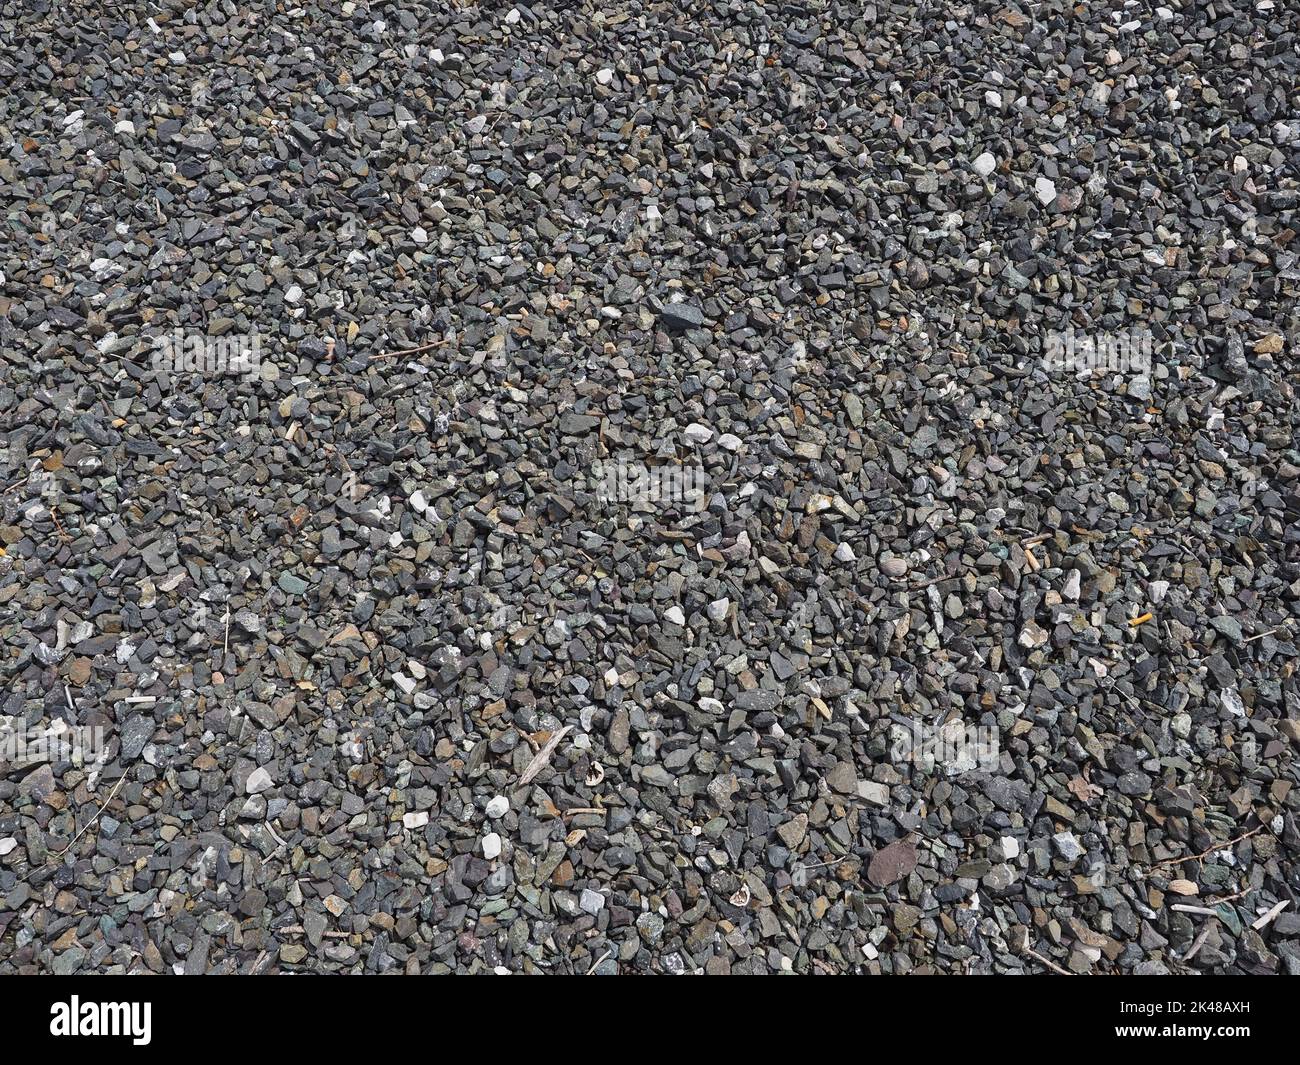 grey gravel texture useful as a background Stock Photo